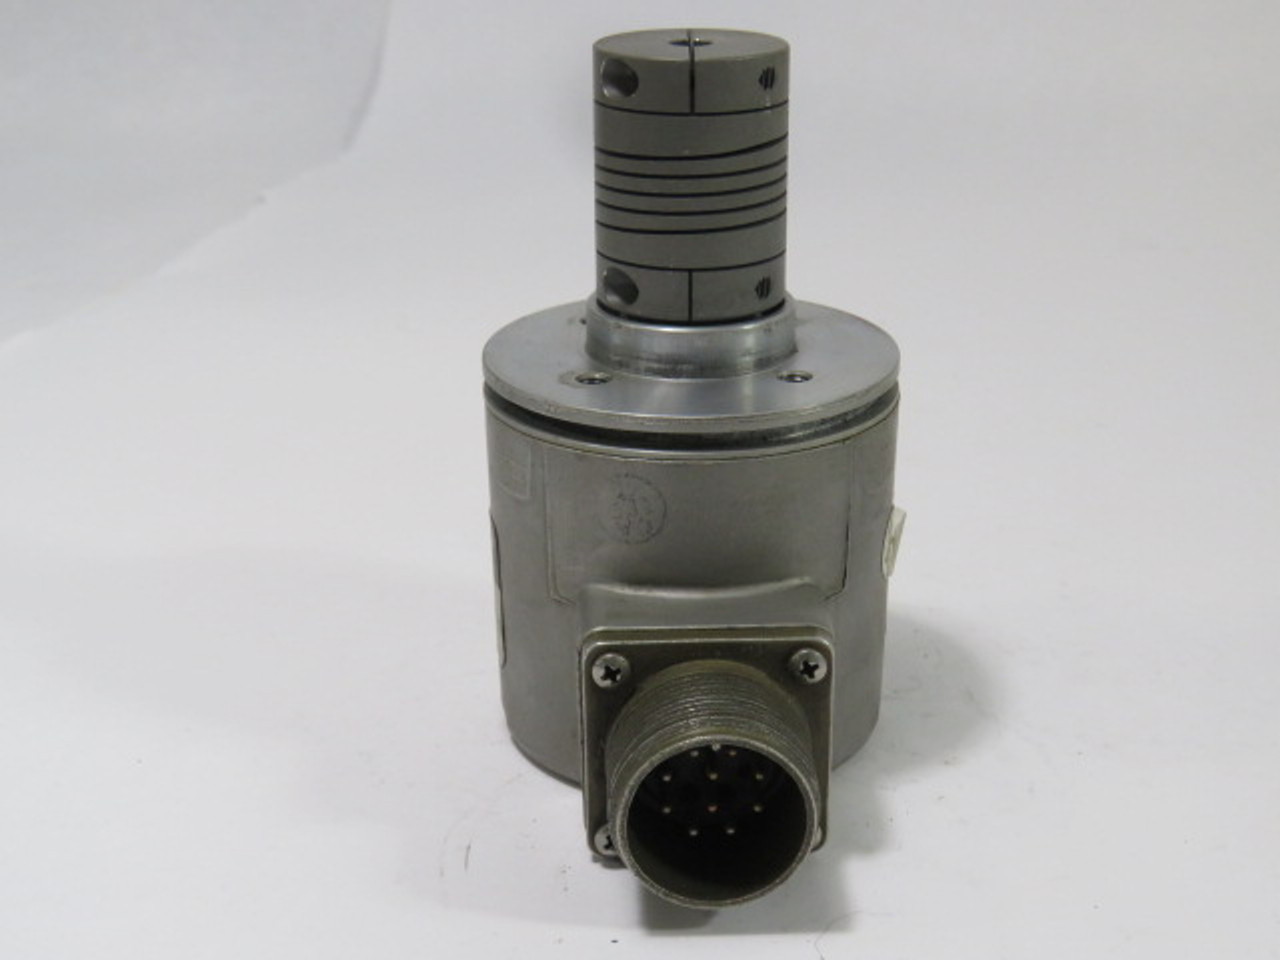 BEI Optical Rotary Encoder 10,000PPR 5-28VDC C/W Coupling USED